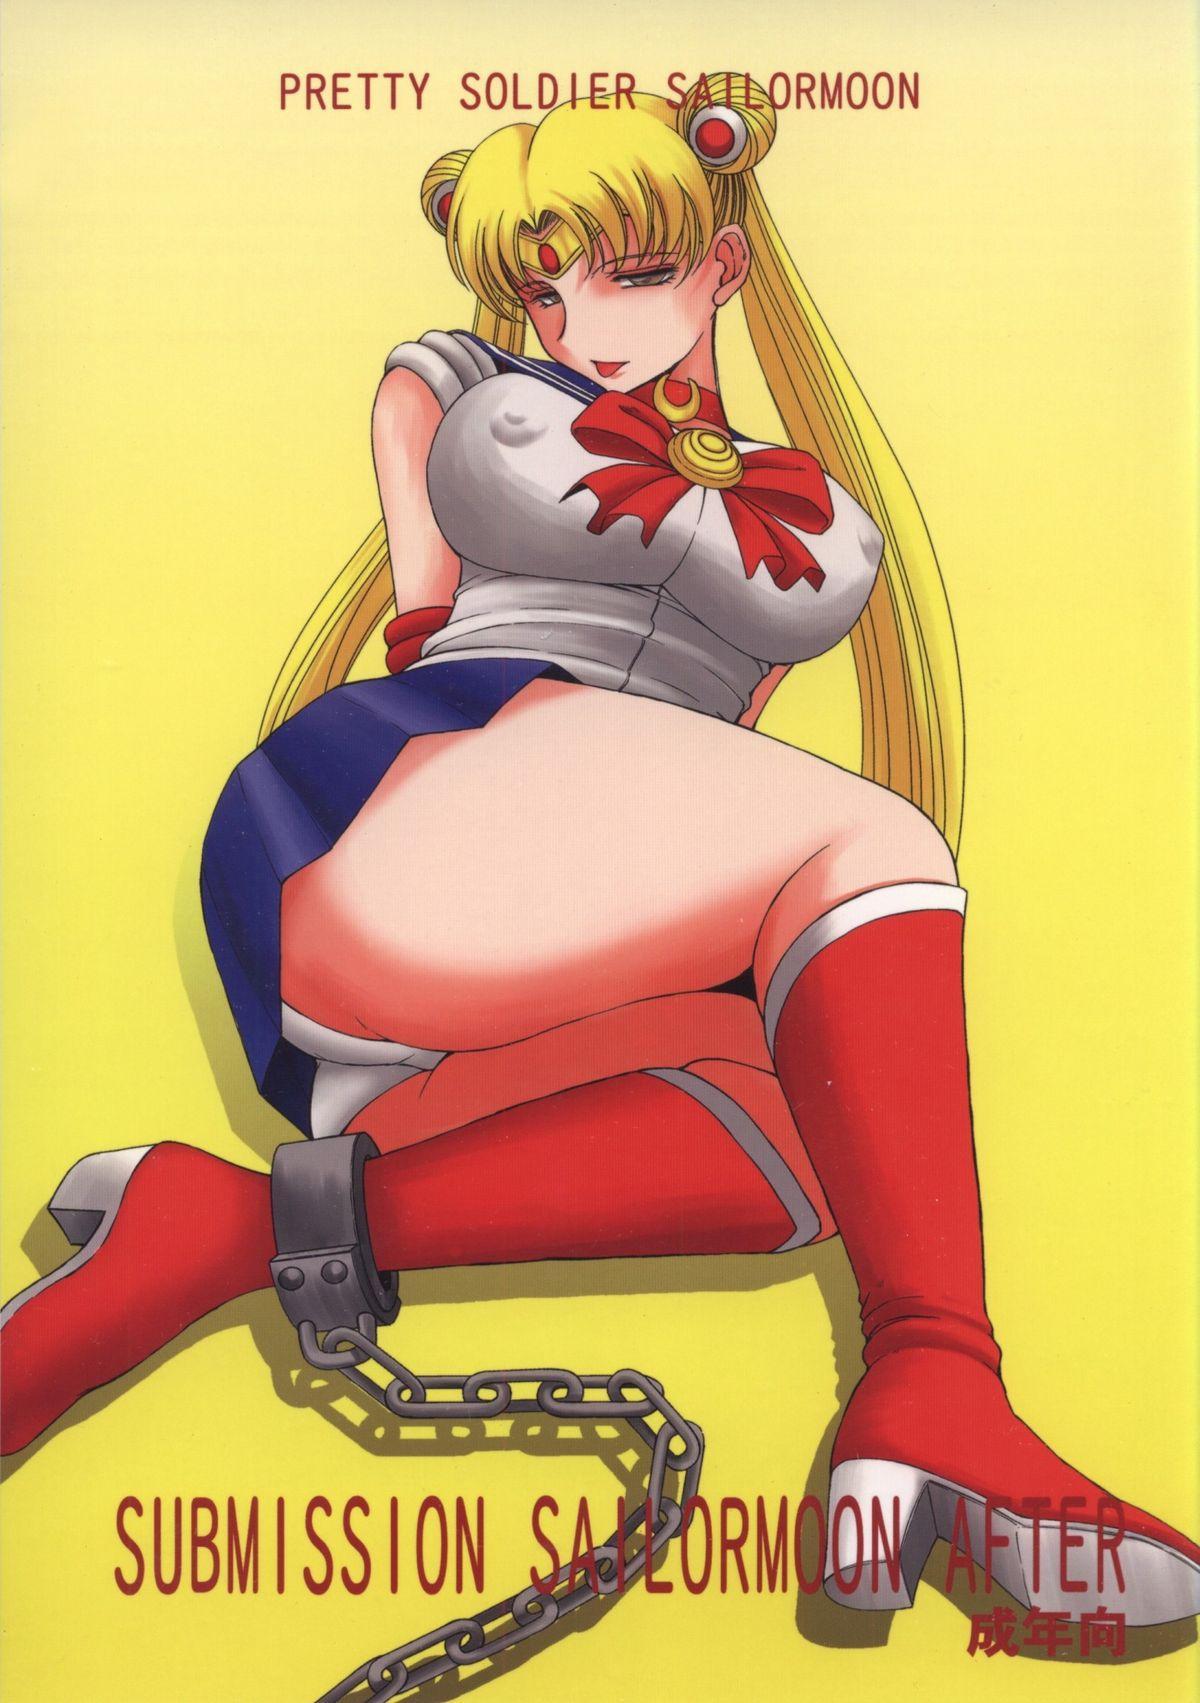 Teasing Submission Sailormoon After/Midgard - Sailor moon Ah my goddess Best Blowjob - Picture 1